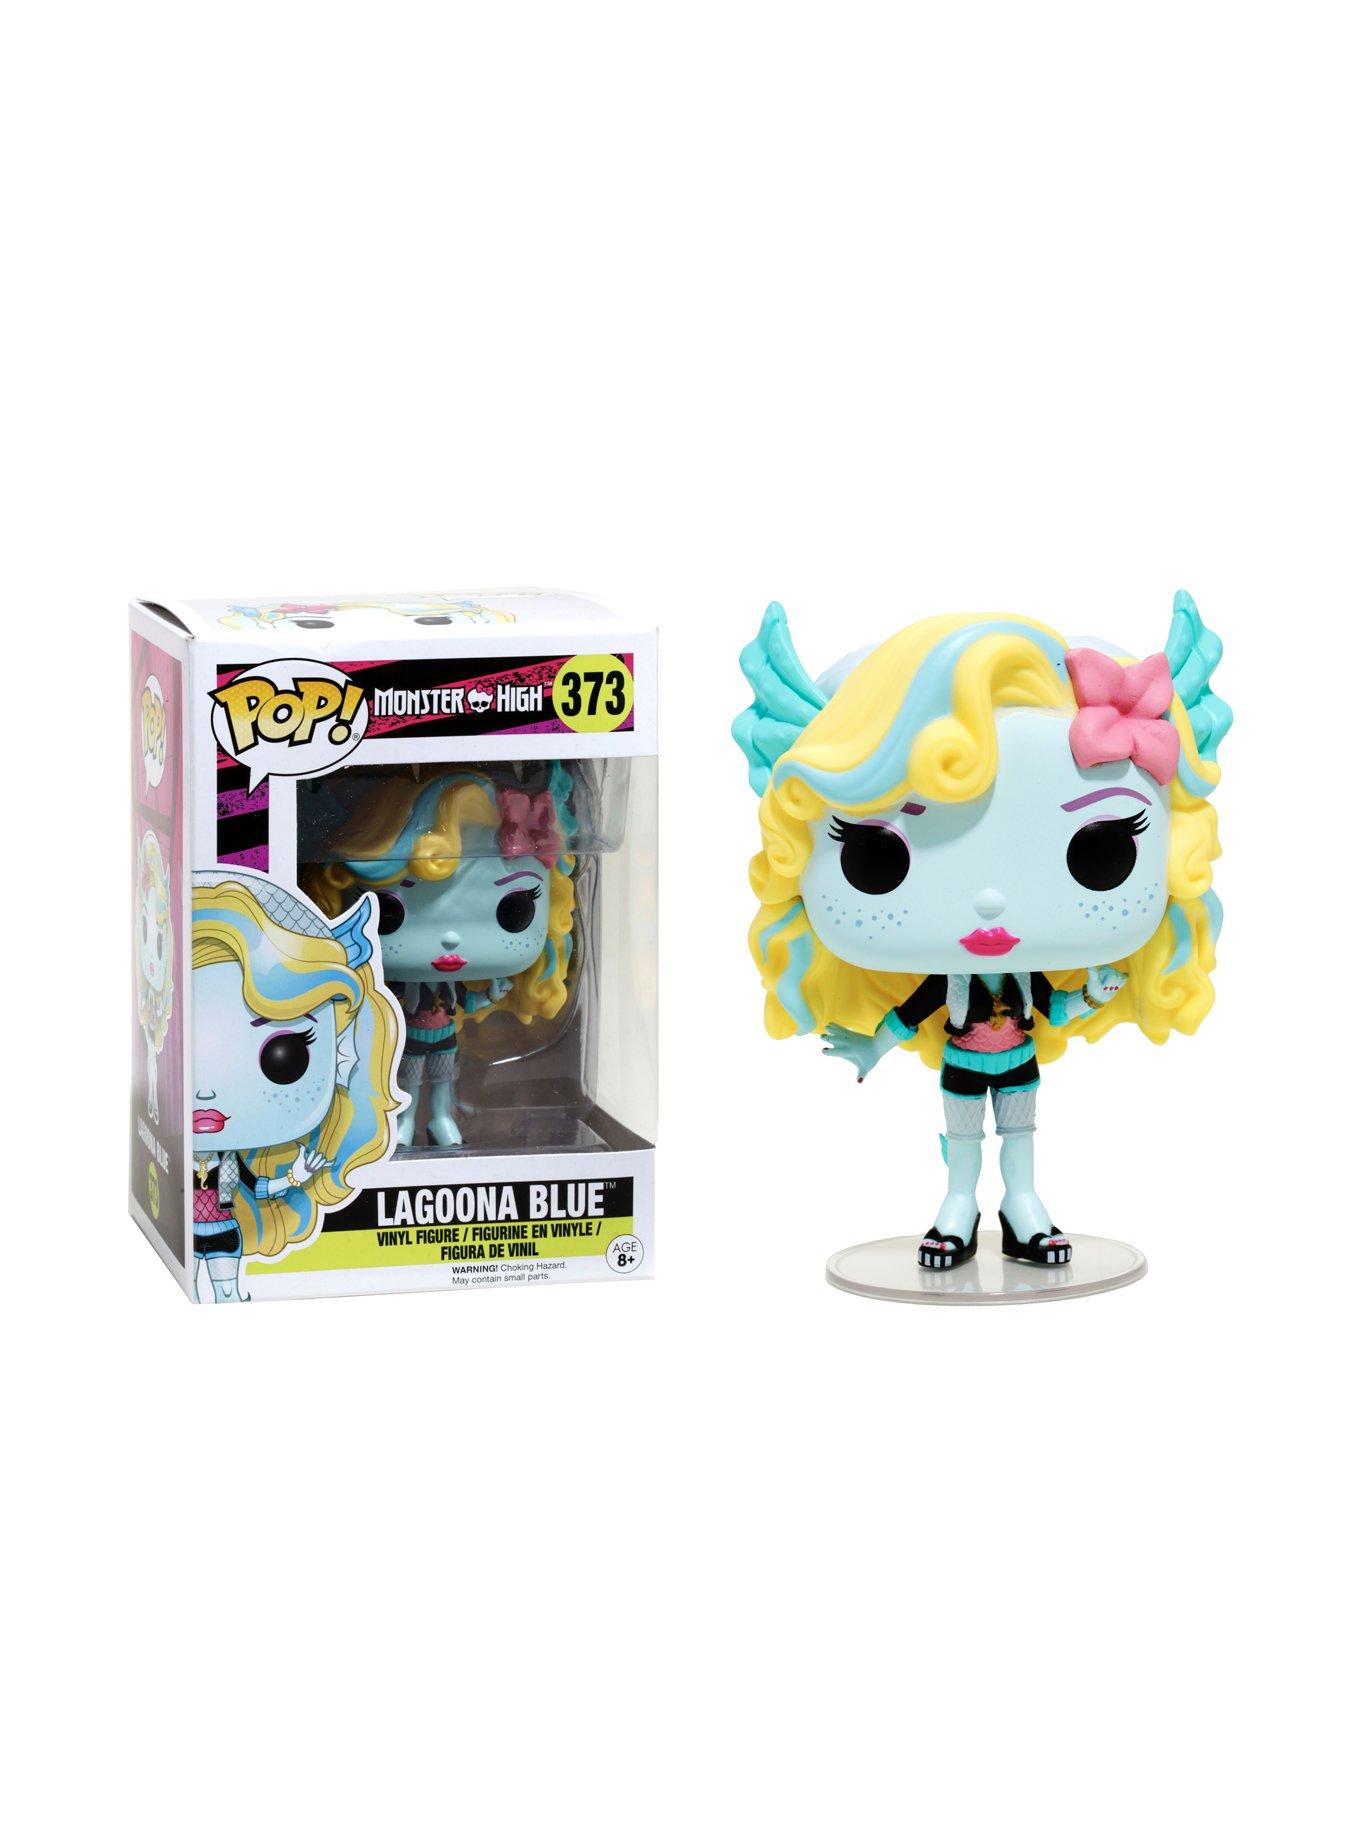 New Monster High Funko Pop Have Arrived! - Blue Culture Tees